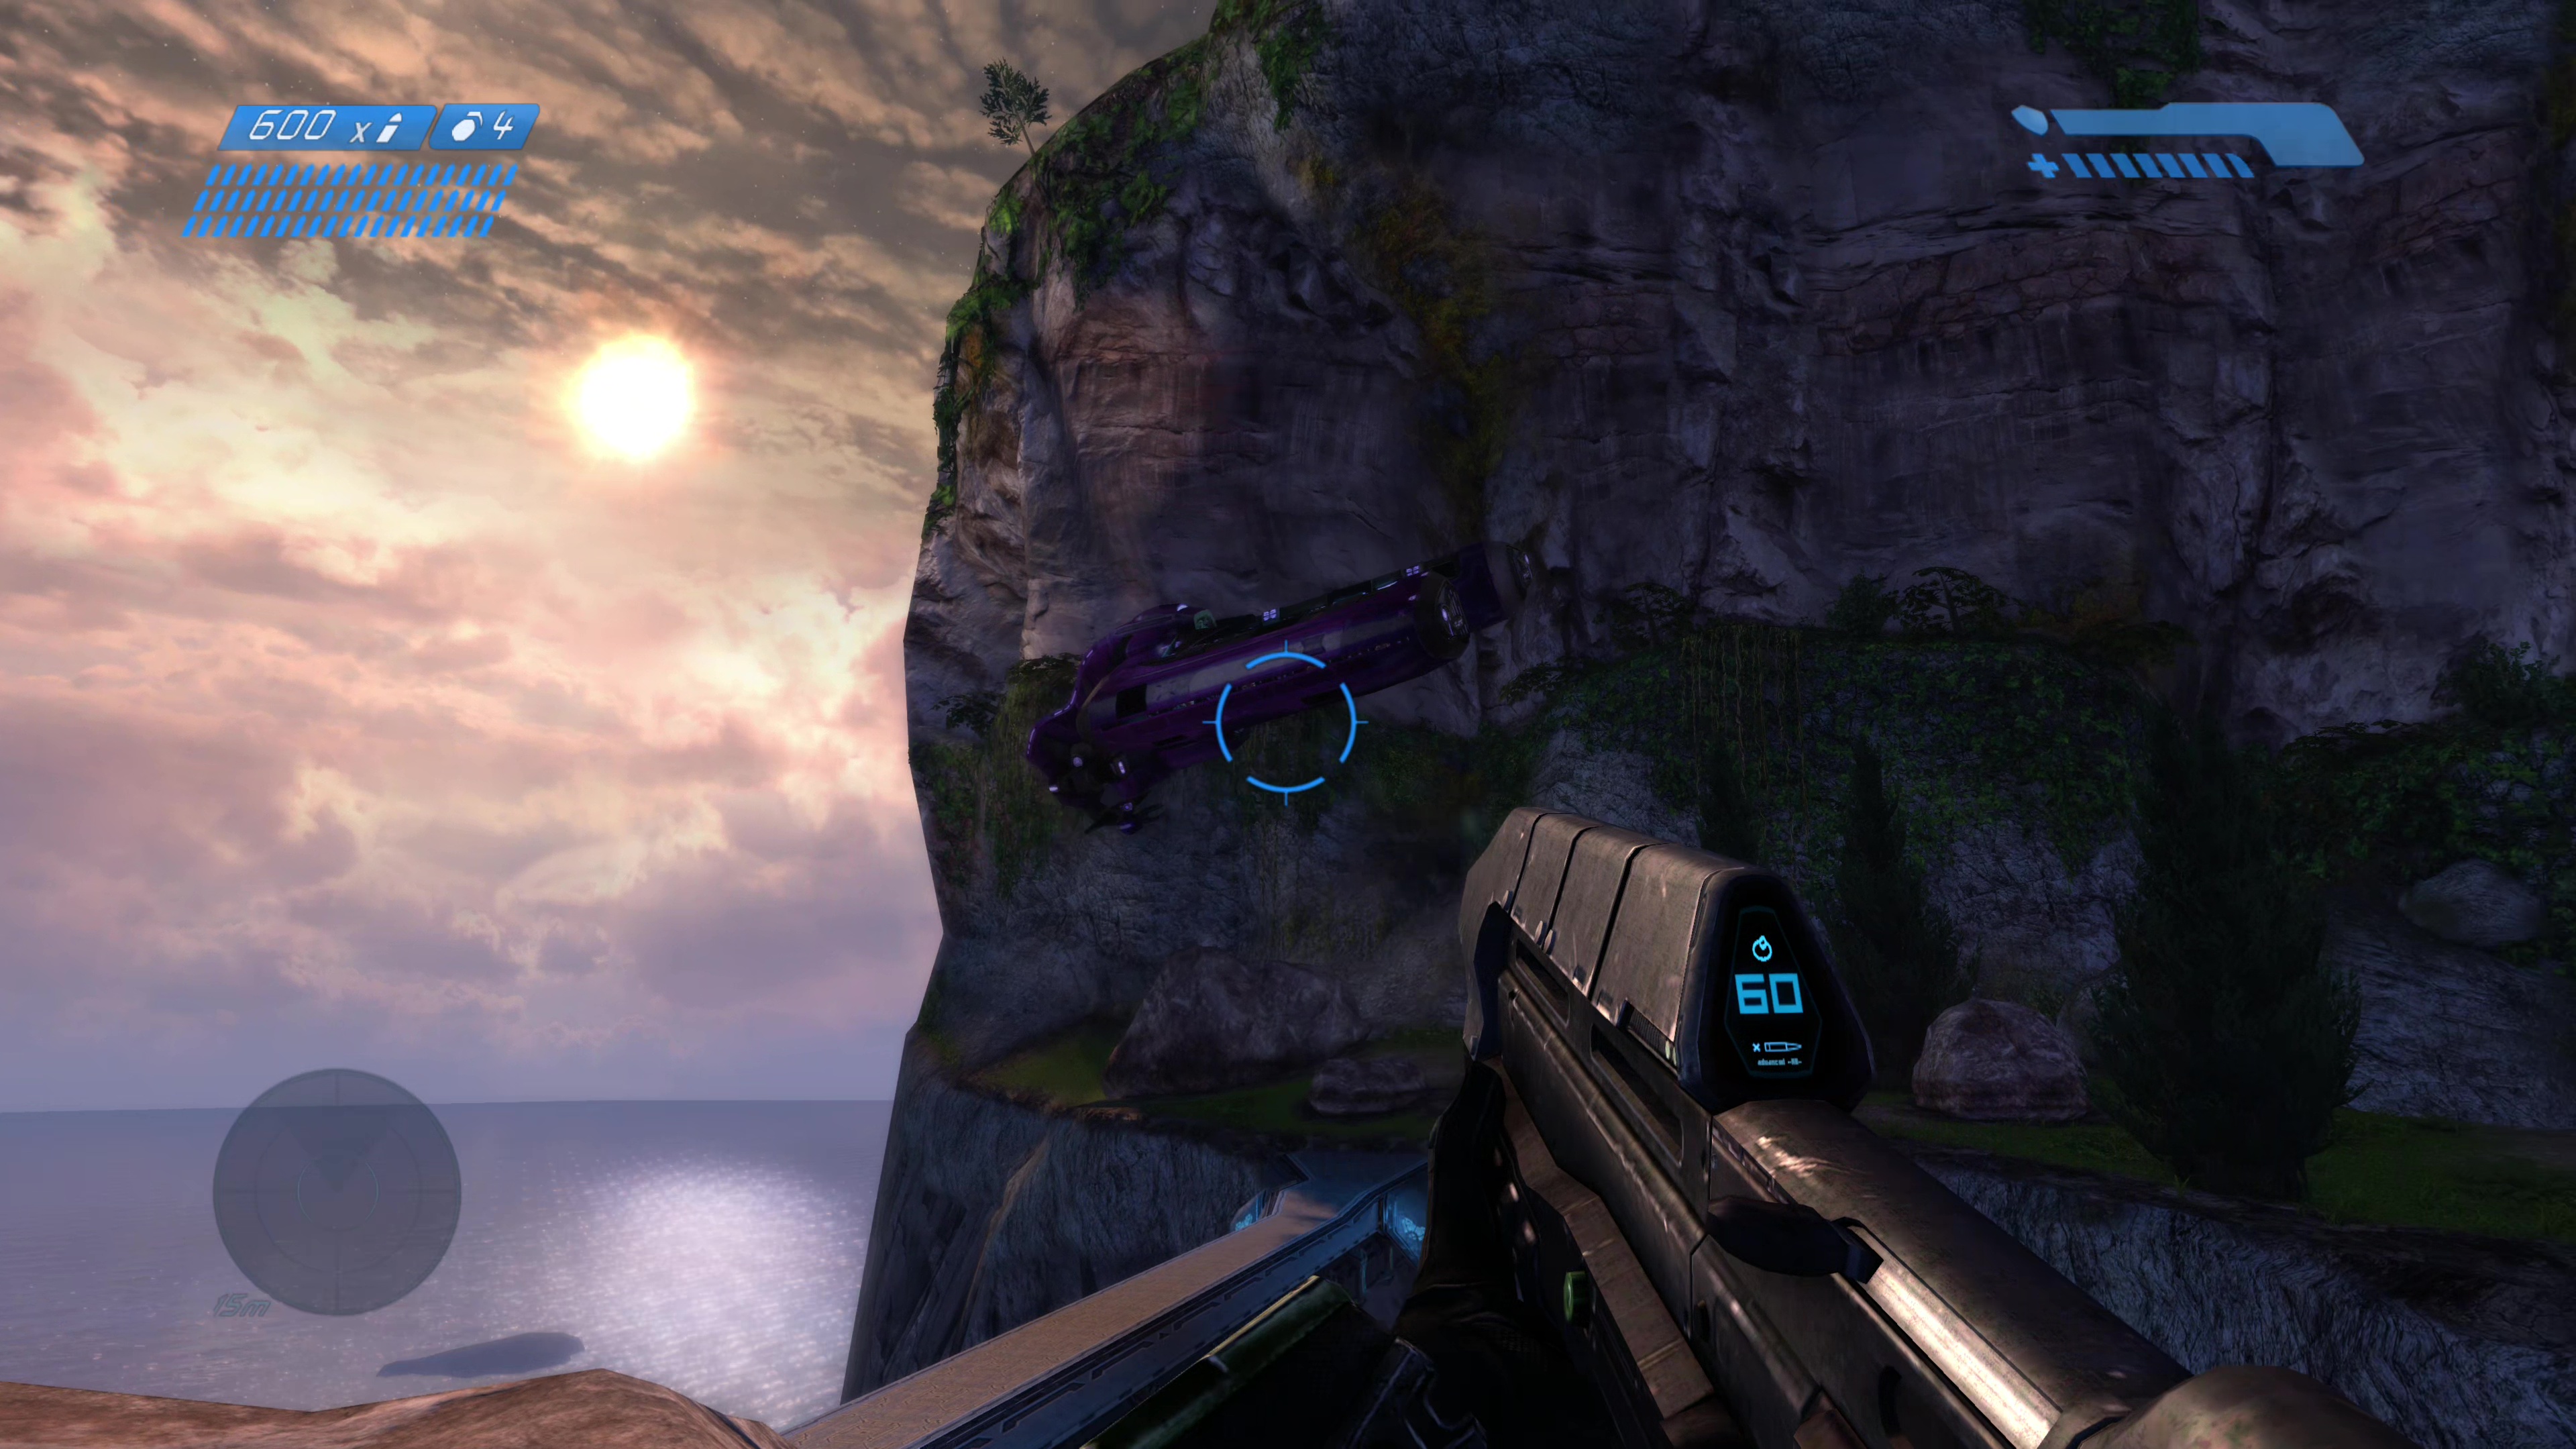 Halo: The Master Chief Collection screenshot 22311